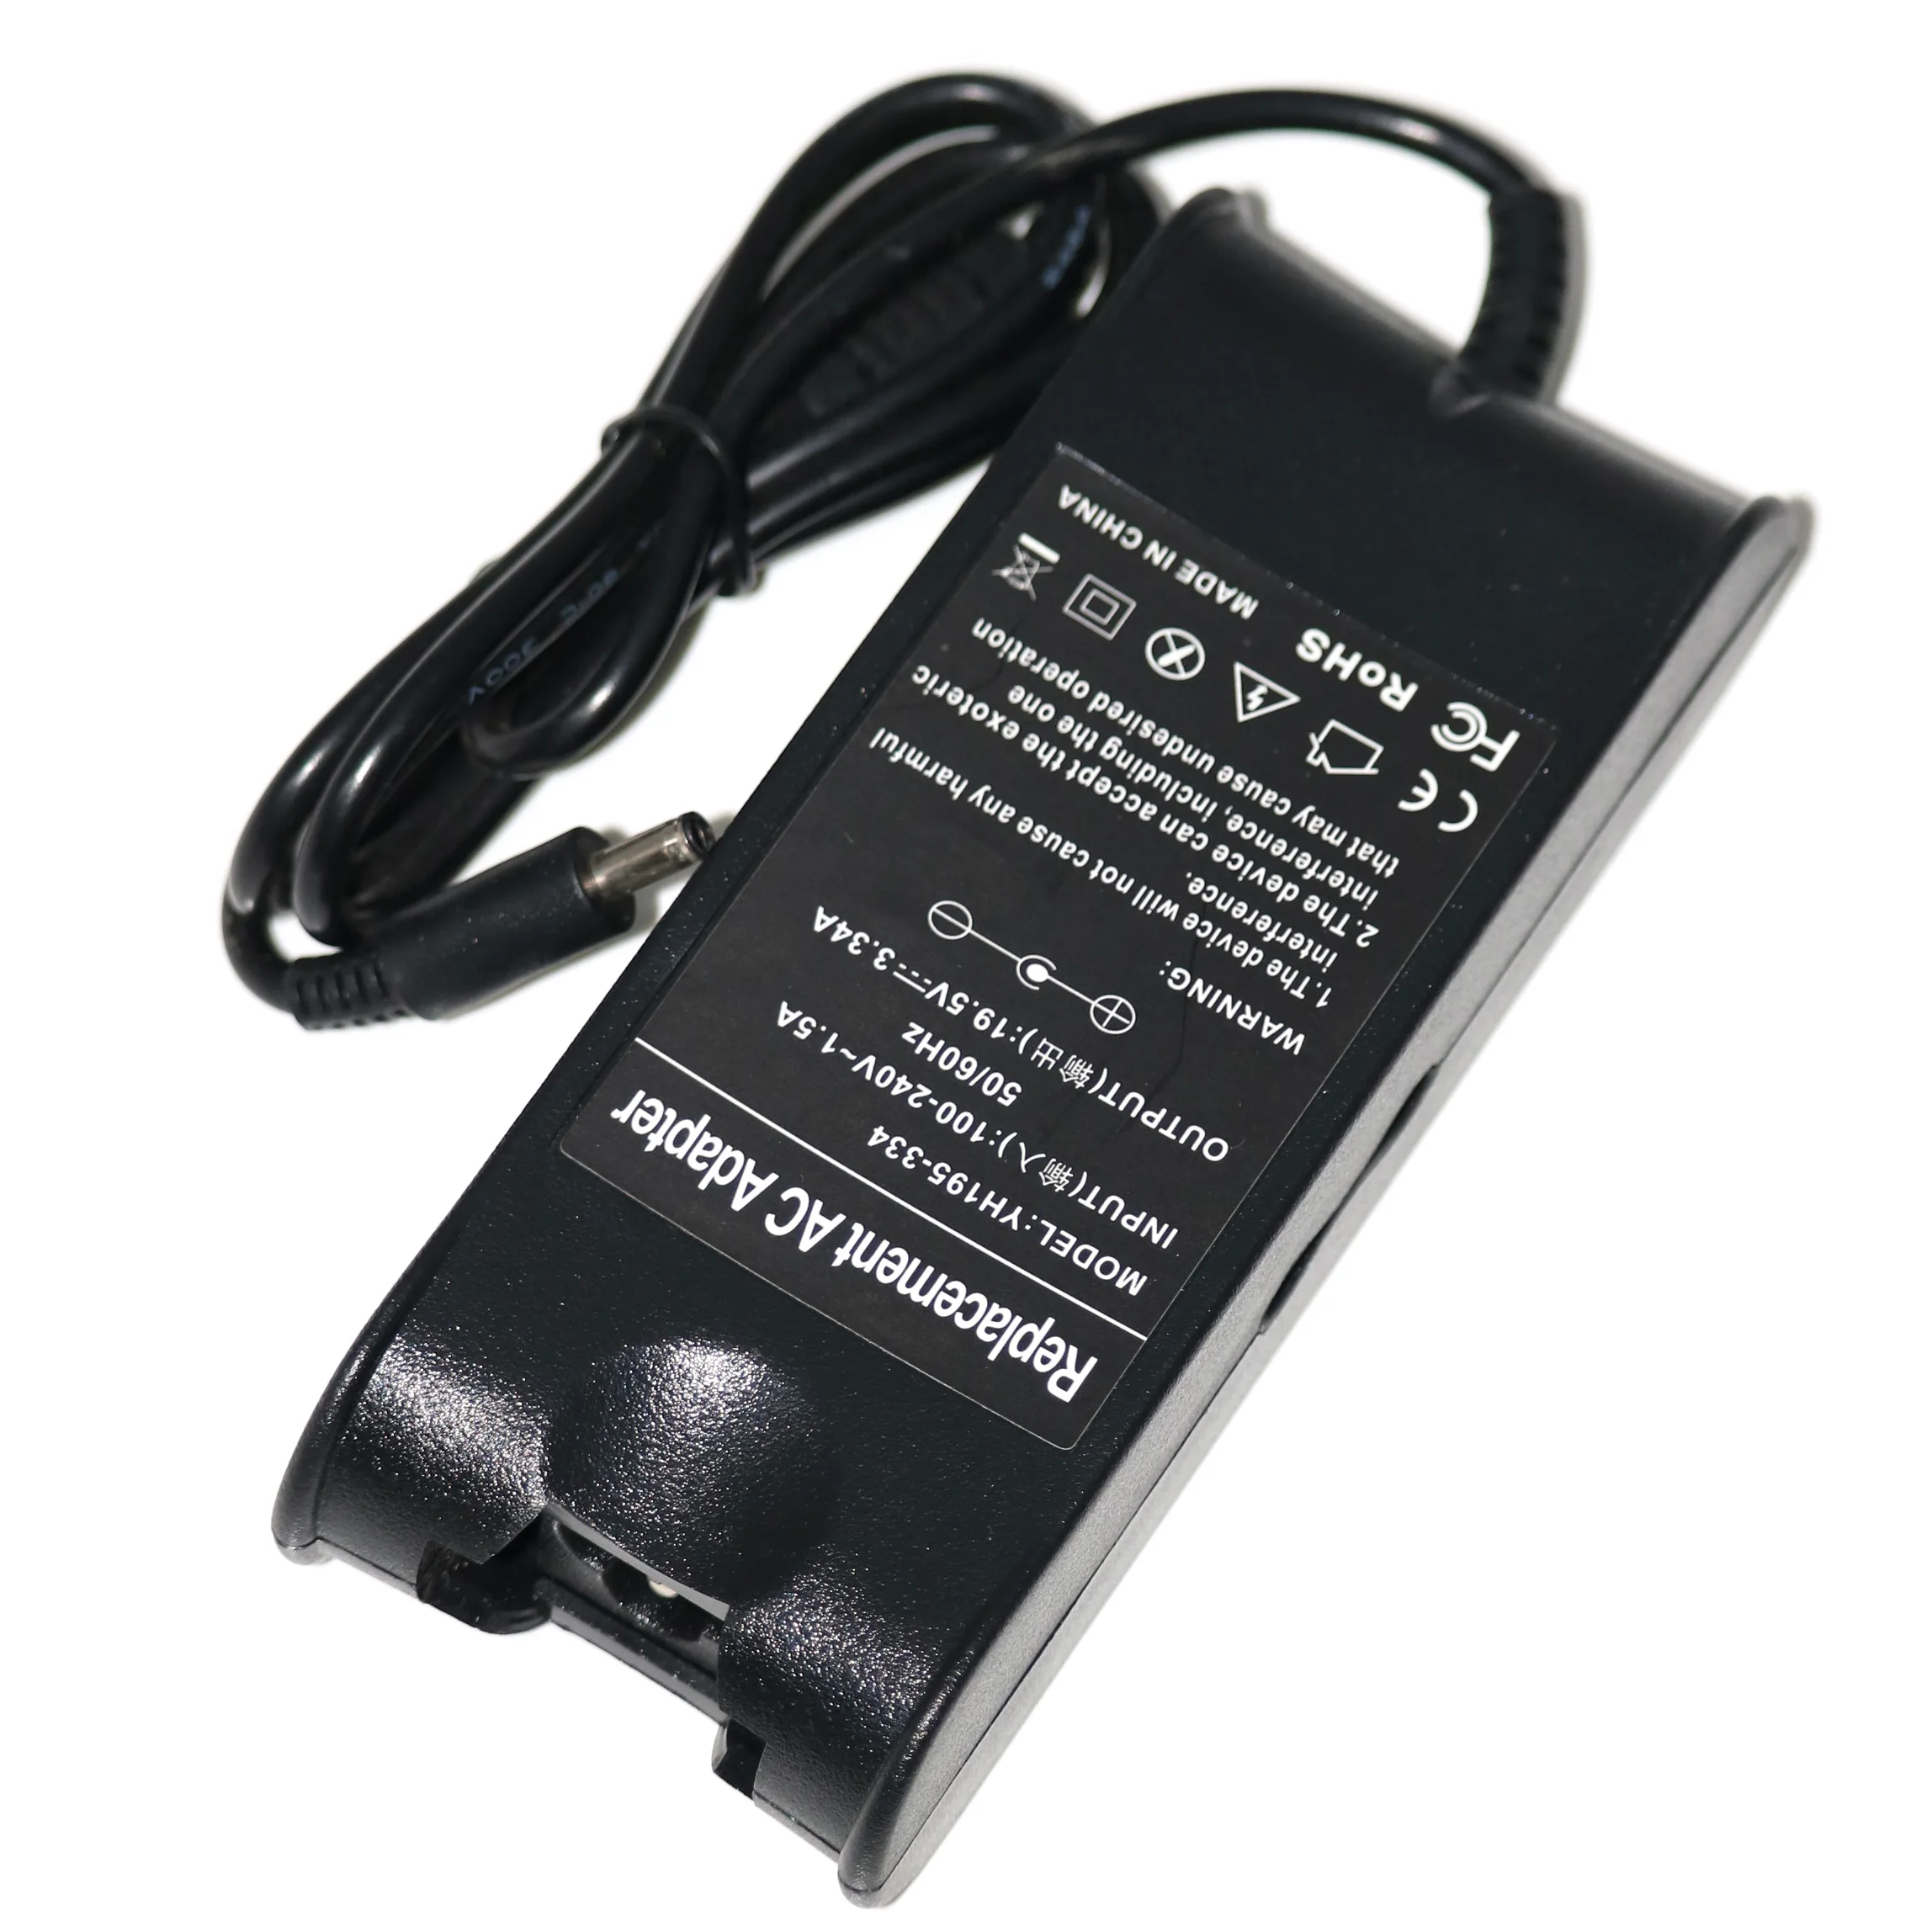 

Laptop Charger 65W/45Watt 4.5mm for dell-inspiron 17 15 14 13 11 7000 5000 3000 Series 3551 3580 5401 5451 5551 5559 5570 5580